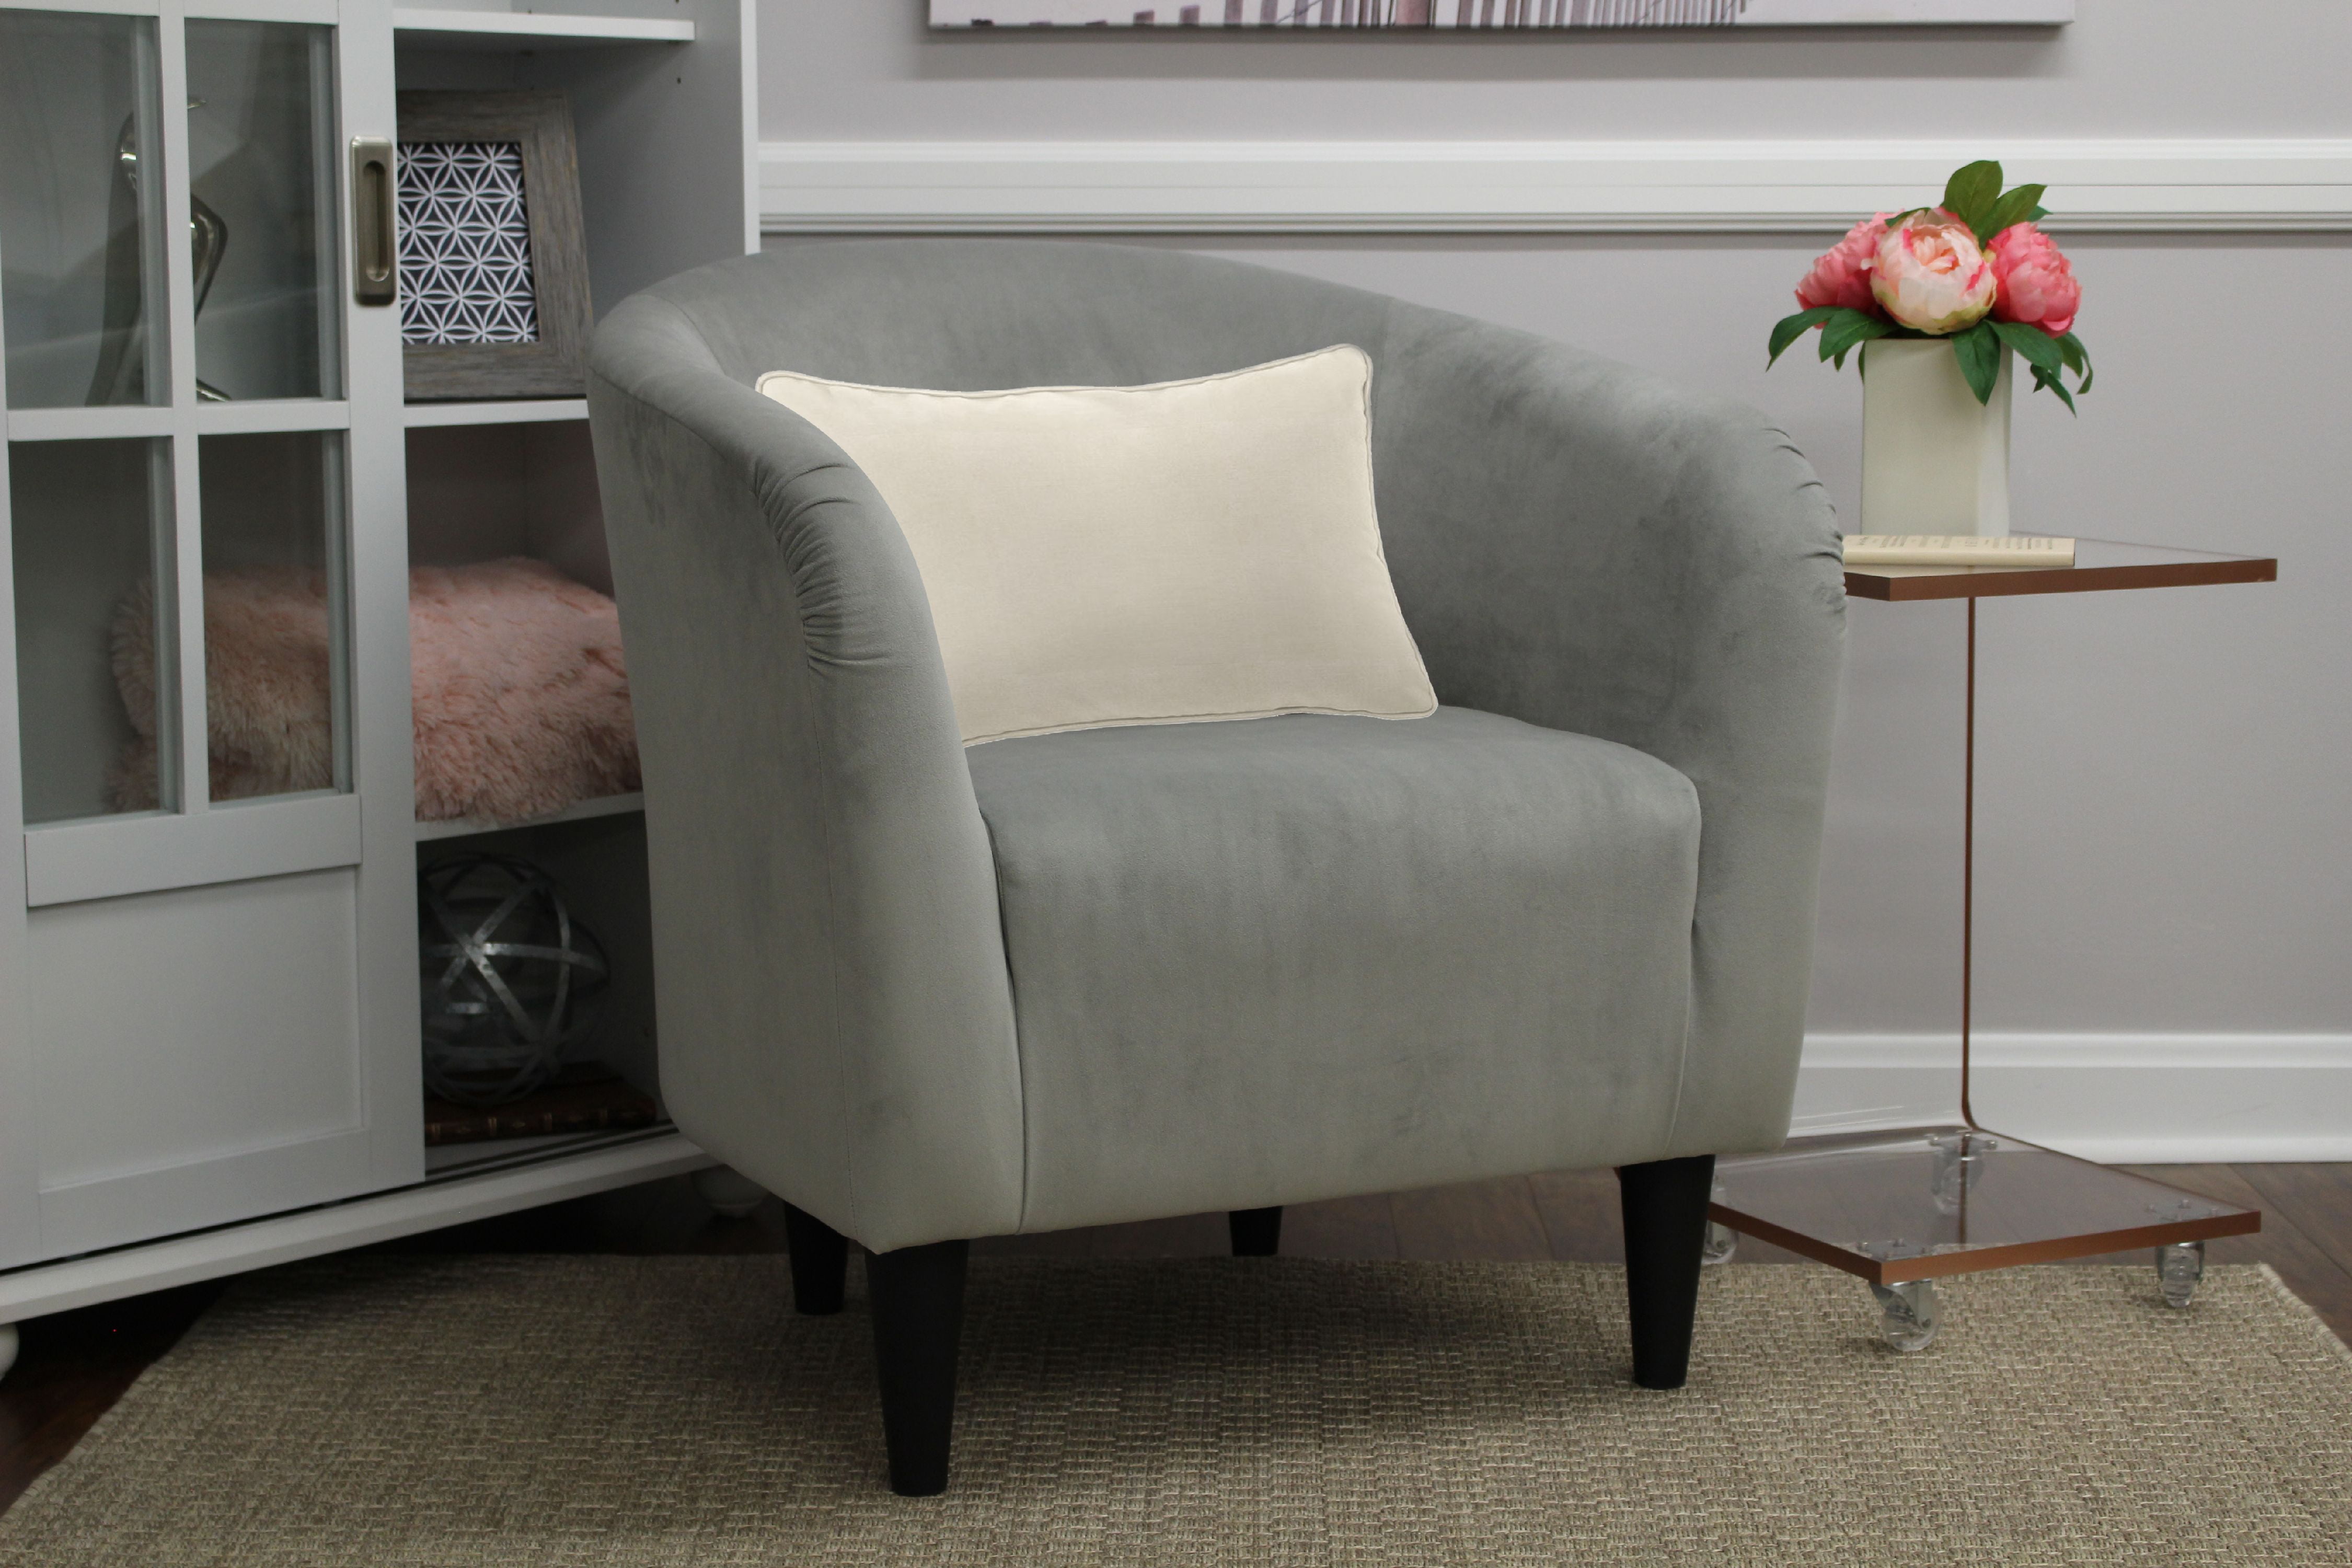 INMOZATA Tub Chair Fabric Upholstered Occasional Chair Grey Curved Back Accent Chair for Living Dining Room Bedroom Furniture 